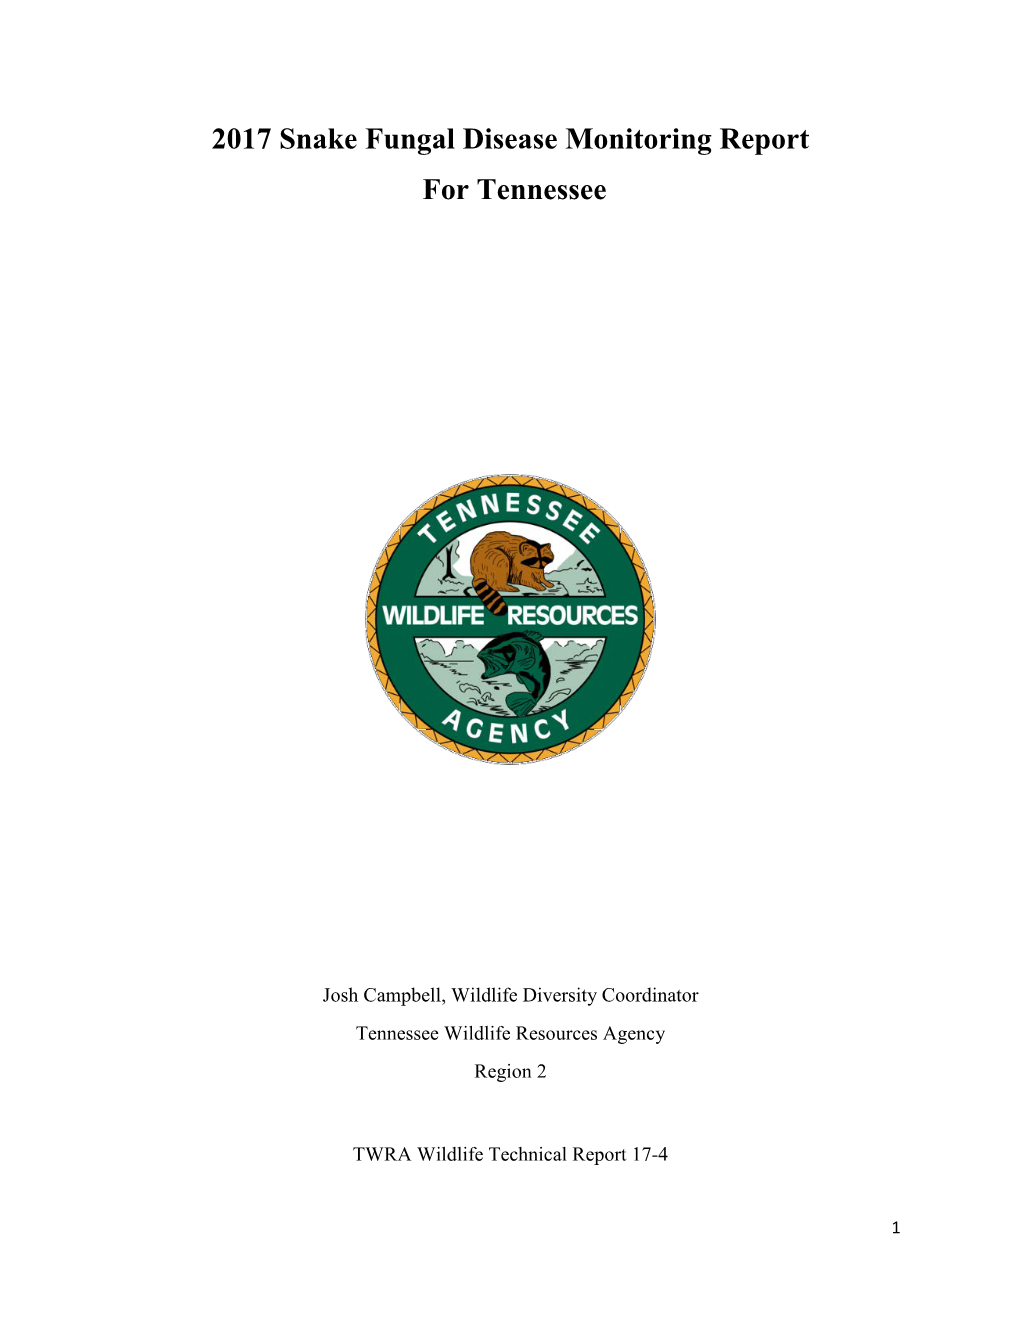 2017 Snake Fungal Disease Monitoring Report for Tennessee